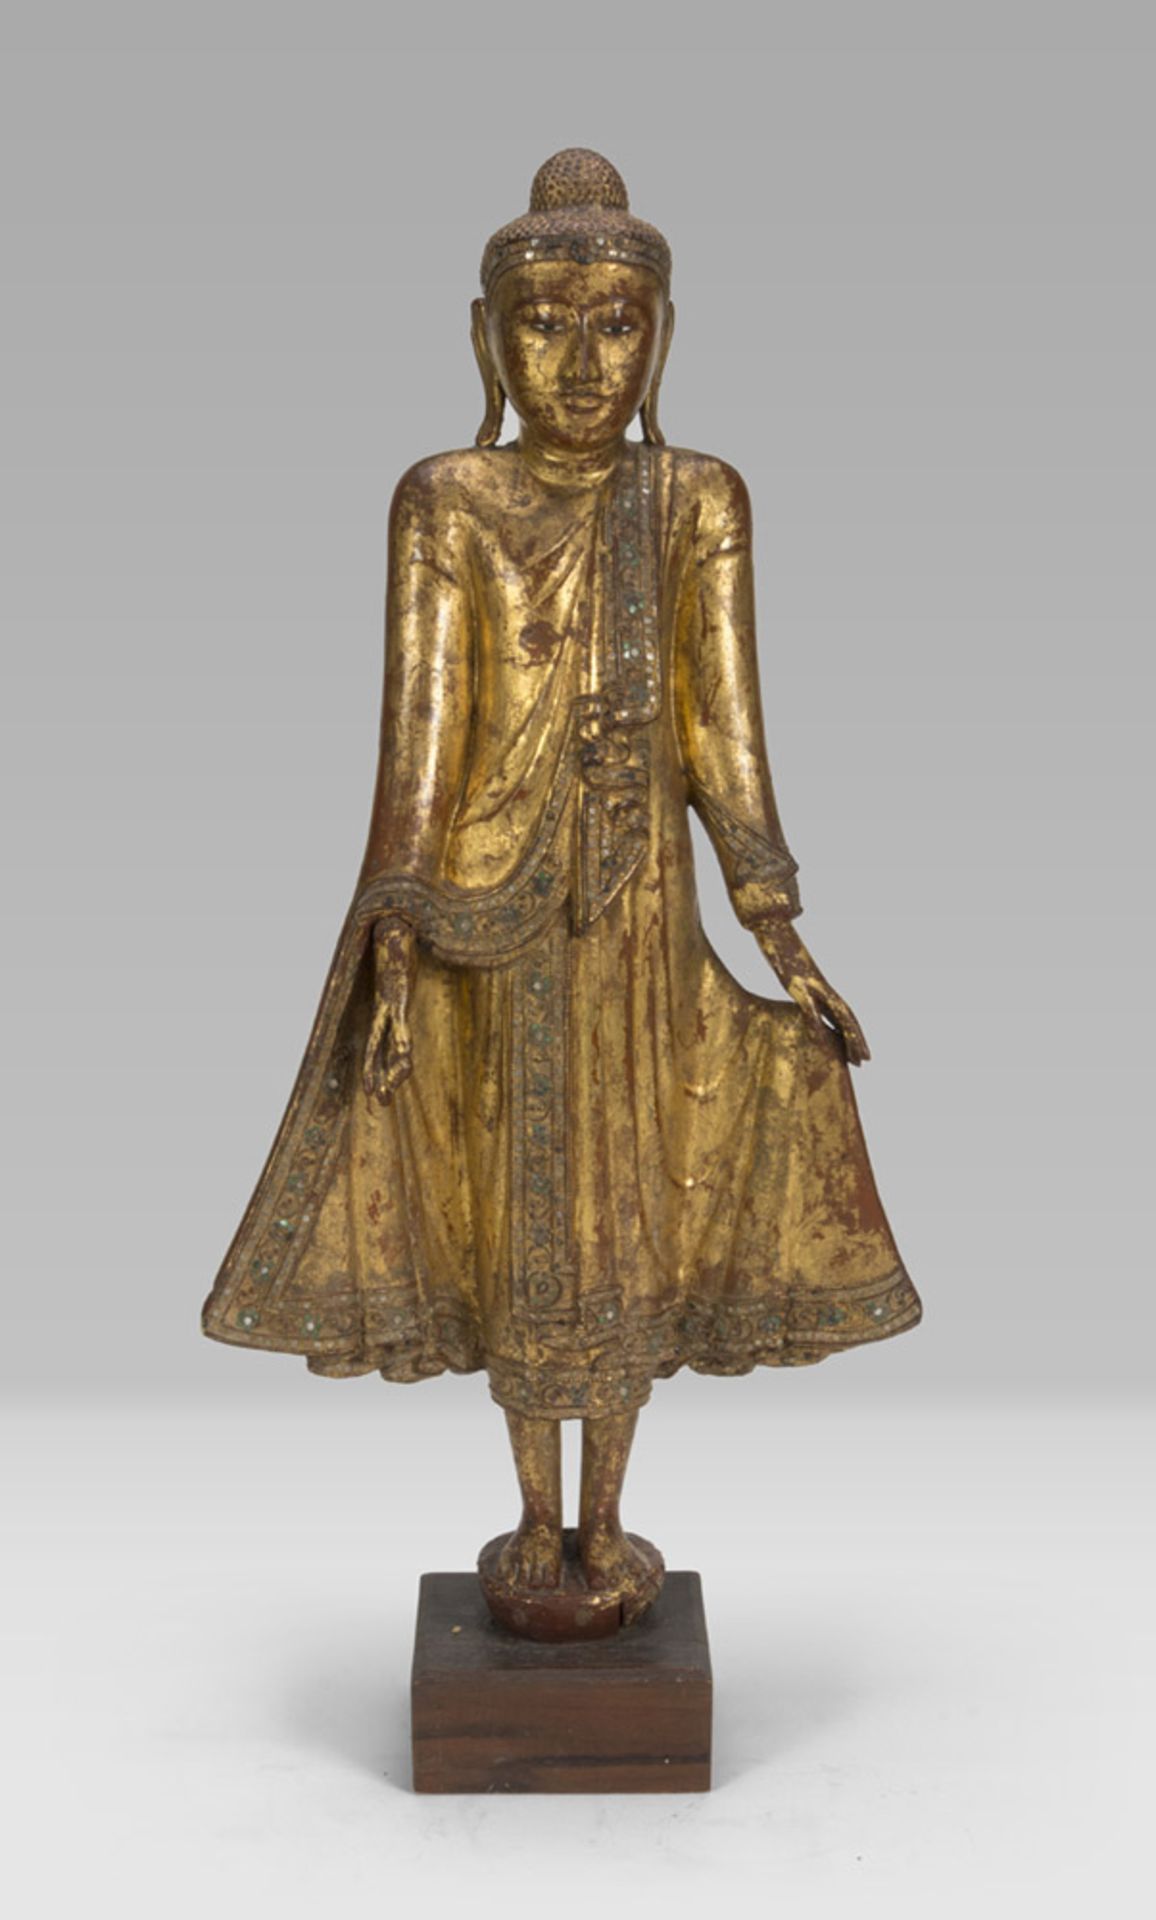 RED AND GOLD LACQUERED WOOD SCULPTURE, BURMA, EARLY 20TH CENTURY